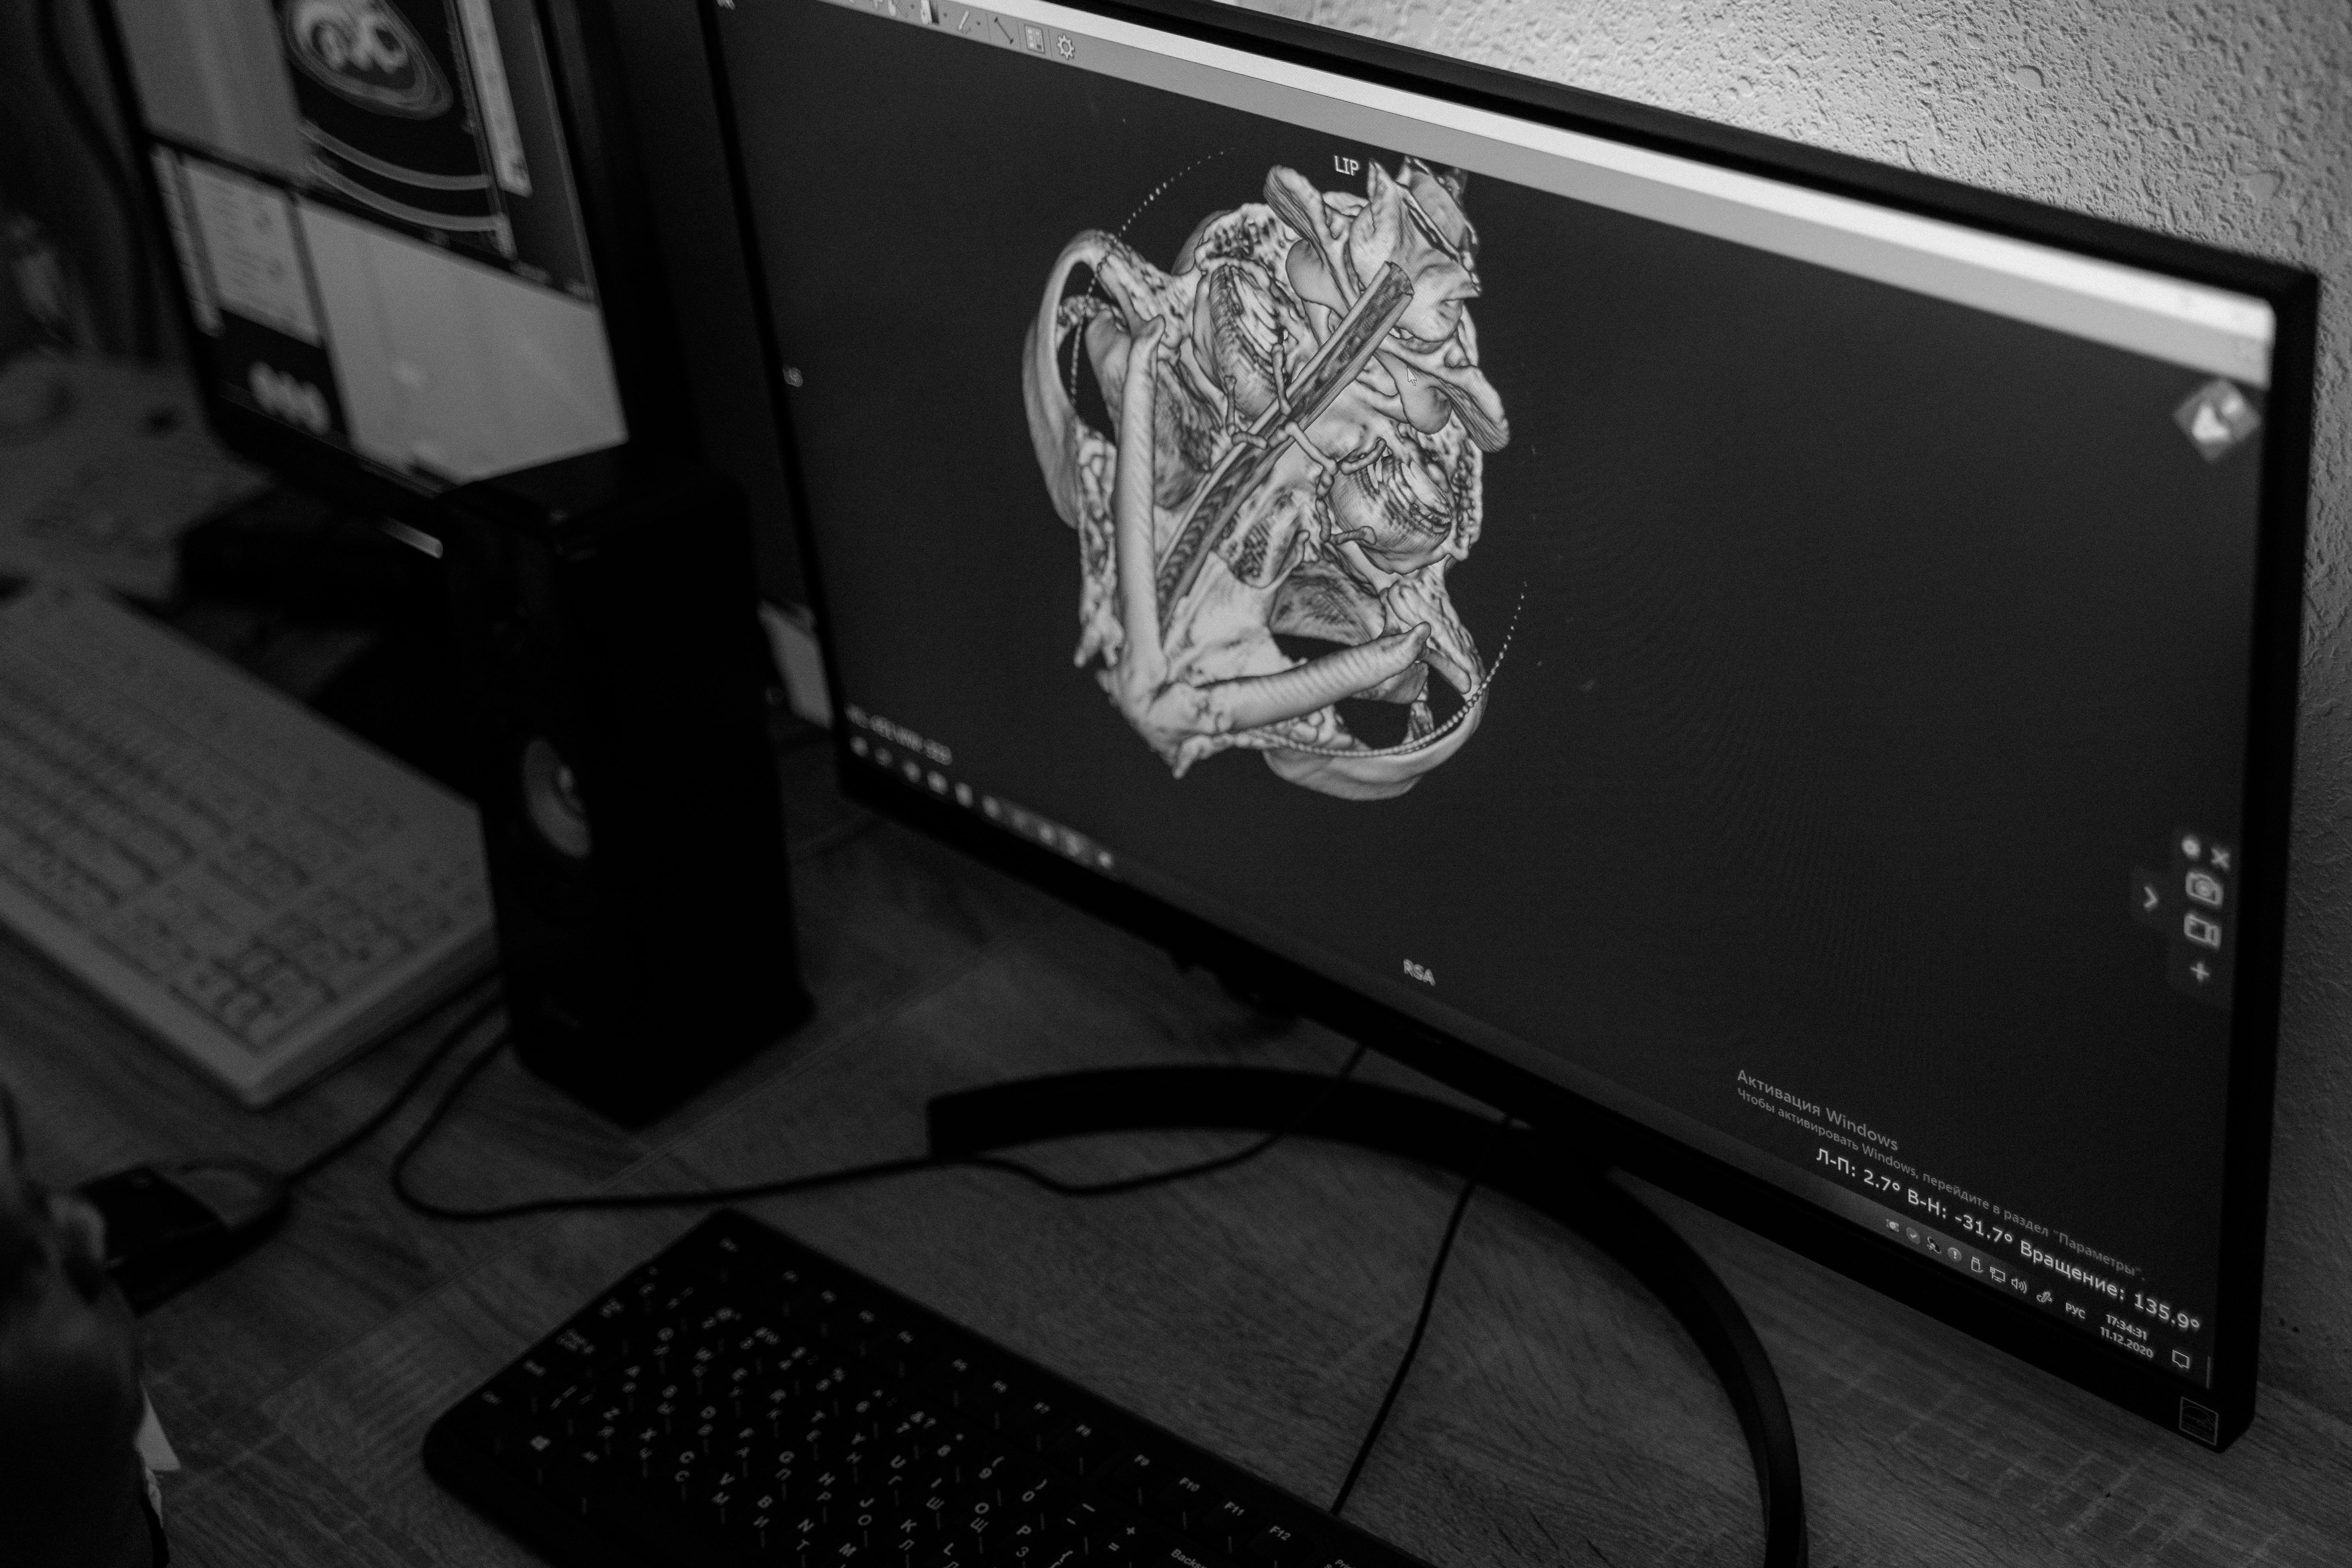 a skull image on the monitor of a computer